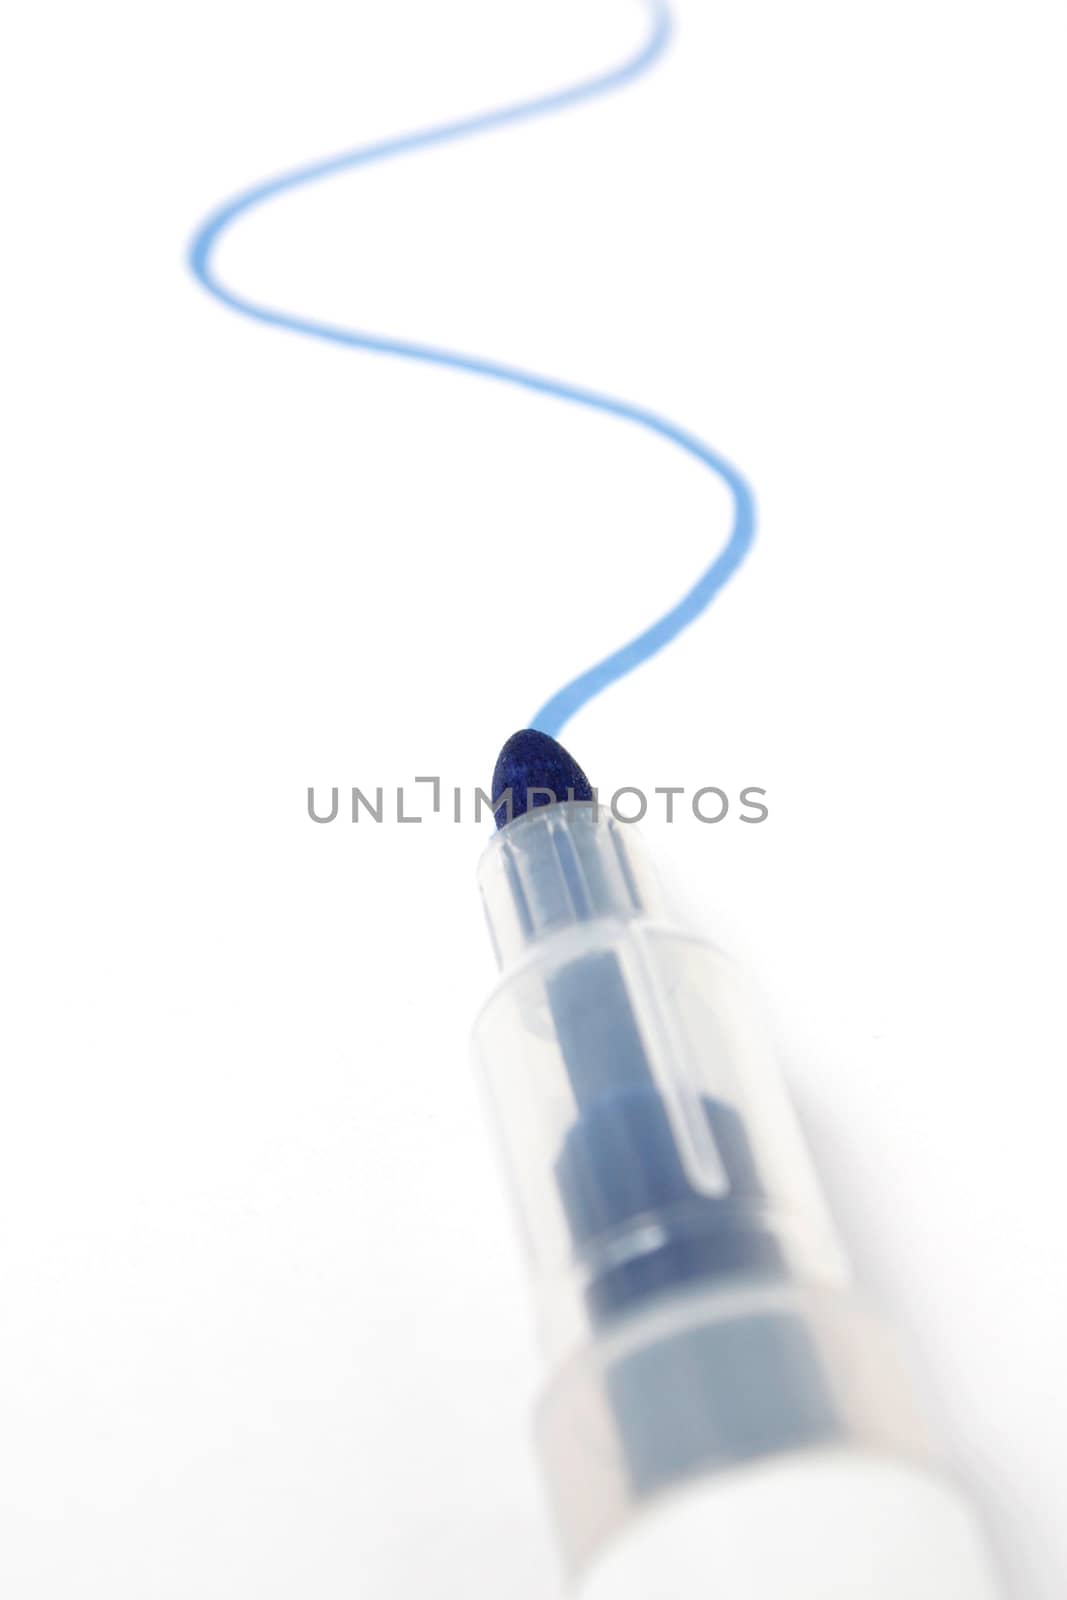 A marker isolated on white